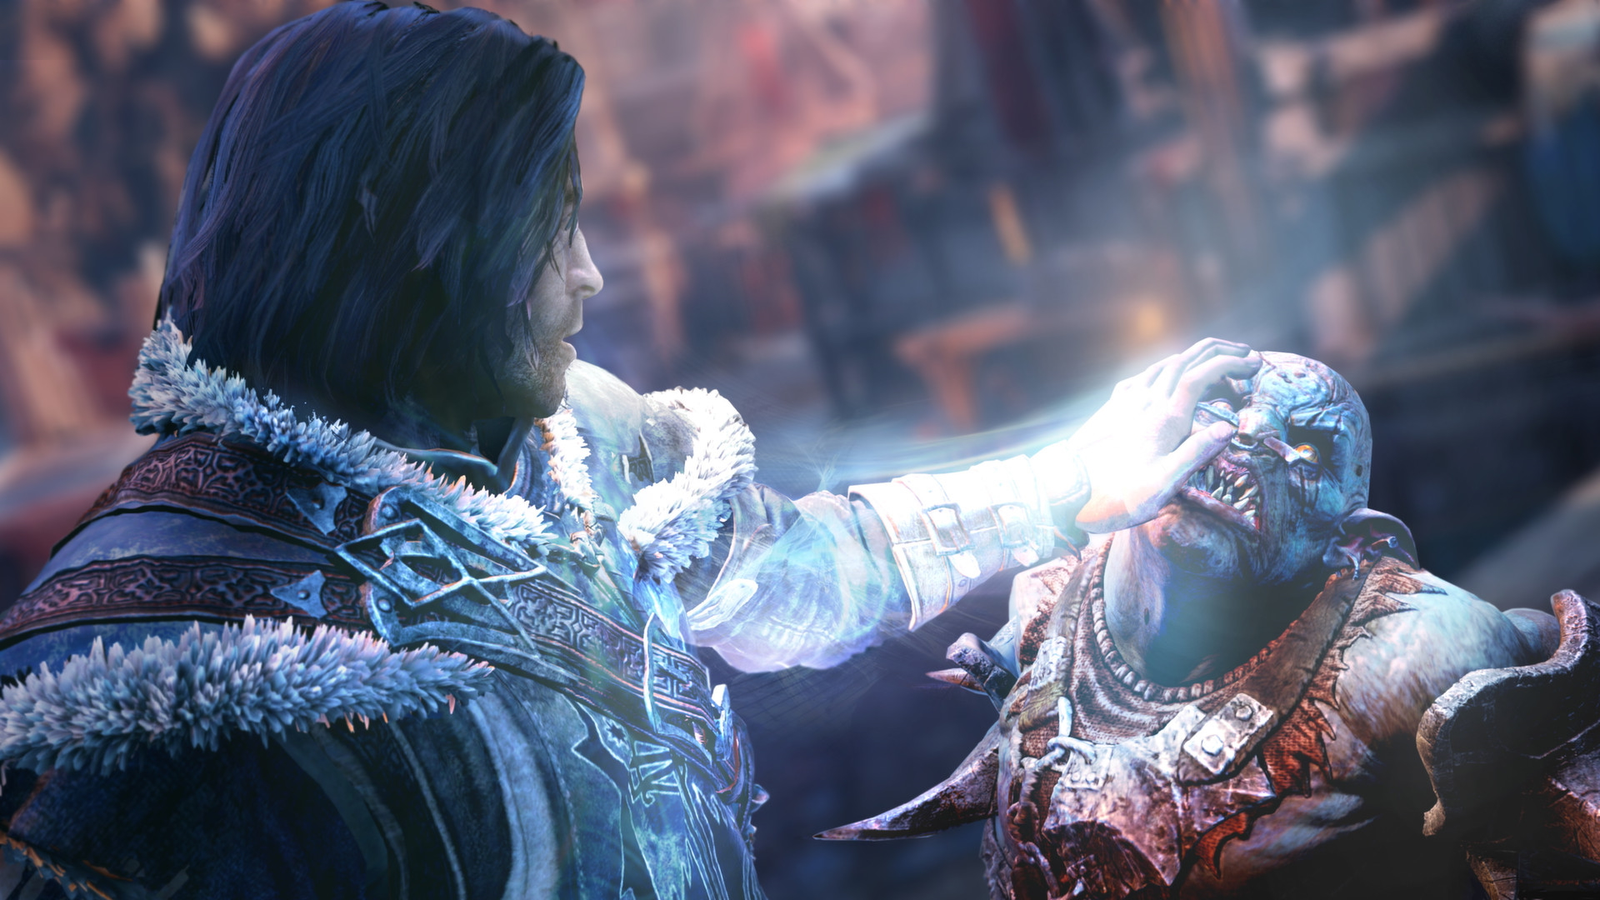 I just don't get Middle-earth: Shadow of Mordor